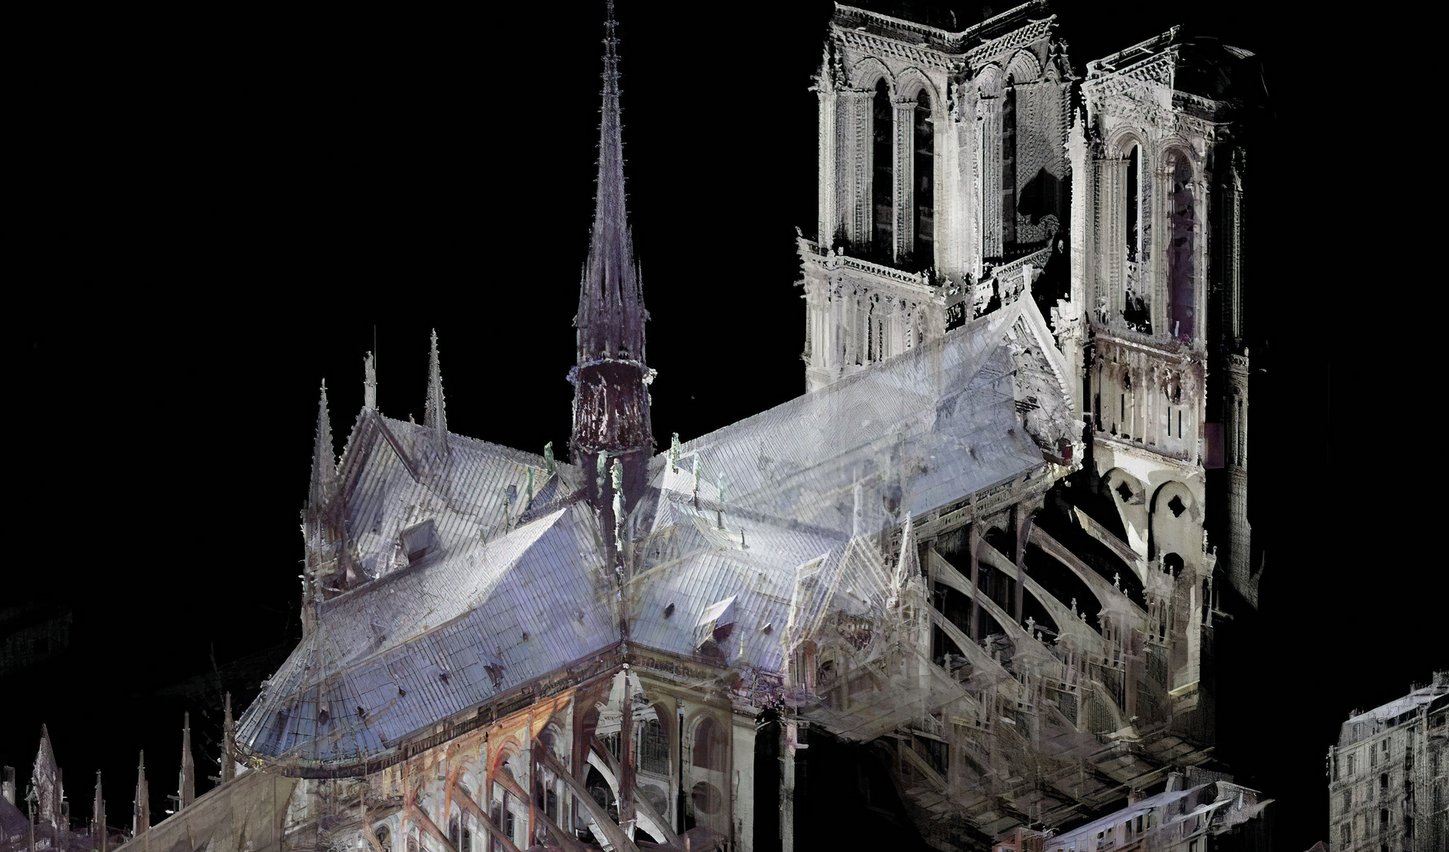 3D side view of the roof structure of Notre-Dame